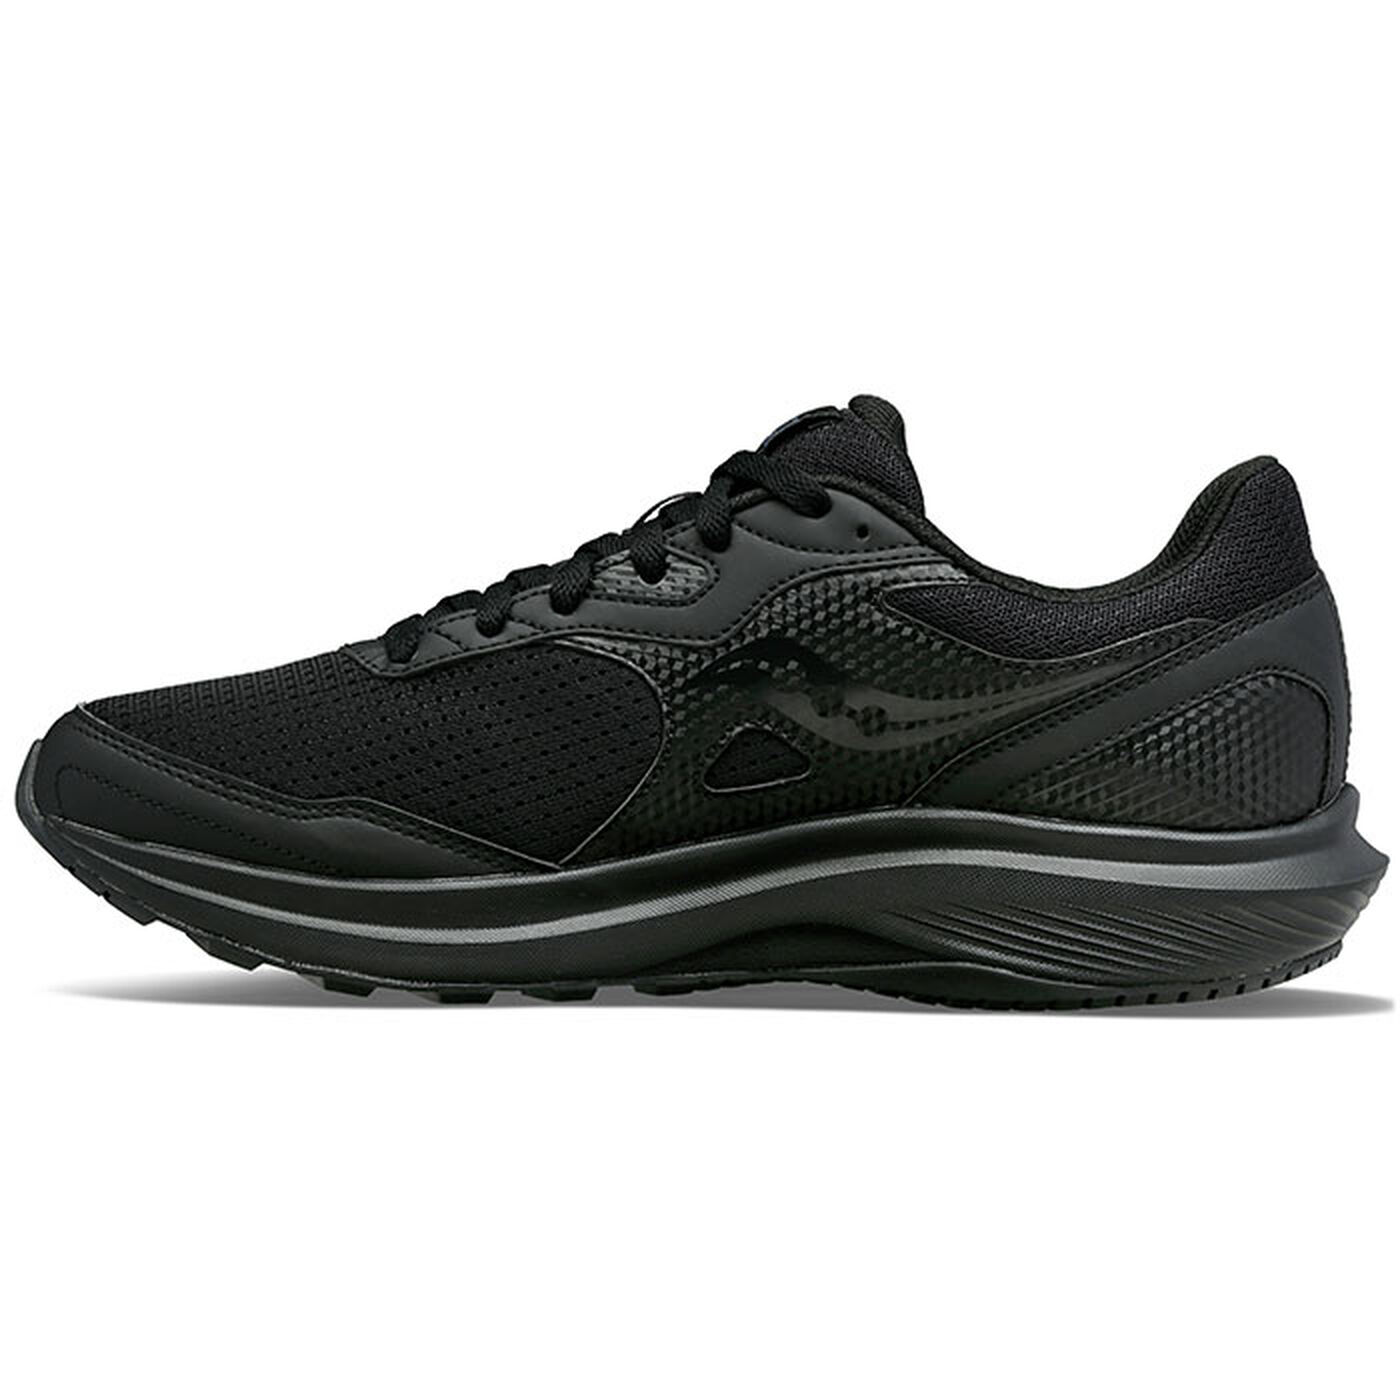 Men's Cohesion 16 Running Shoe | Saucony | Sporting Life Online